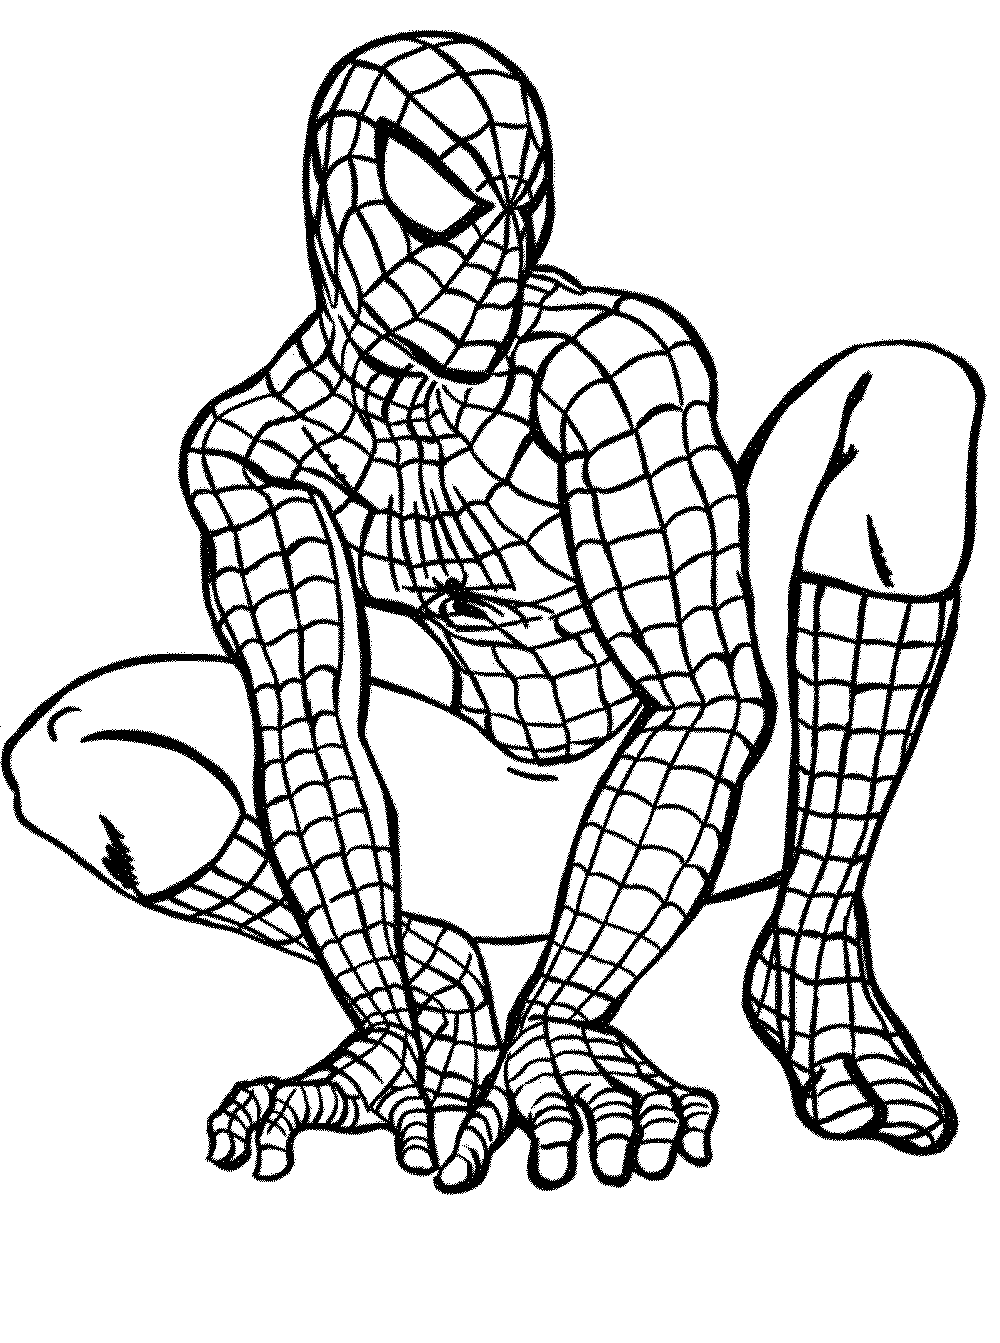 Spiderman Coloring Pages Download - Printable Kids Colouring Pages